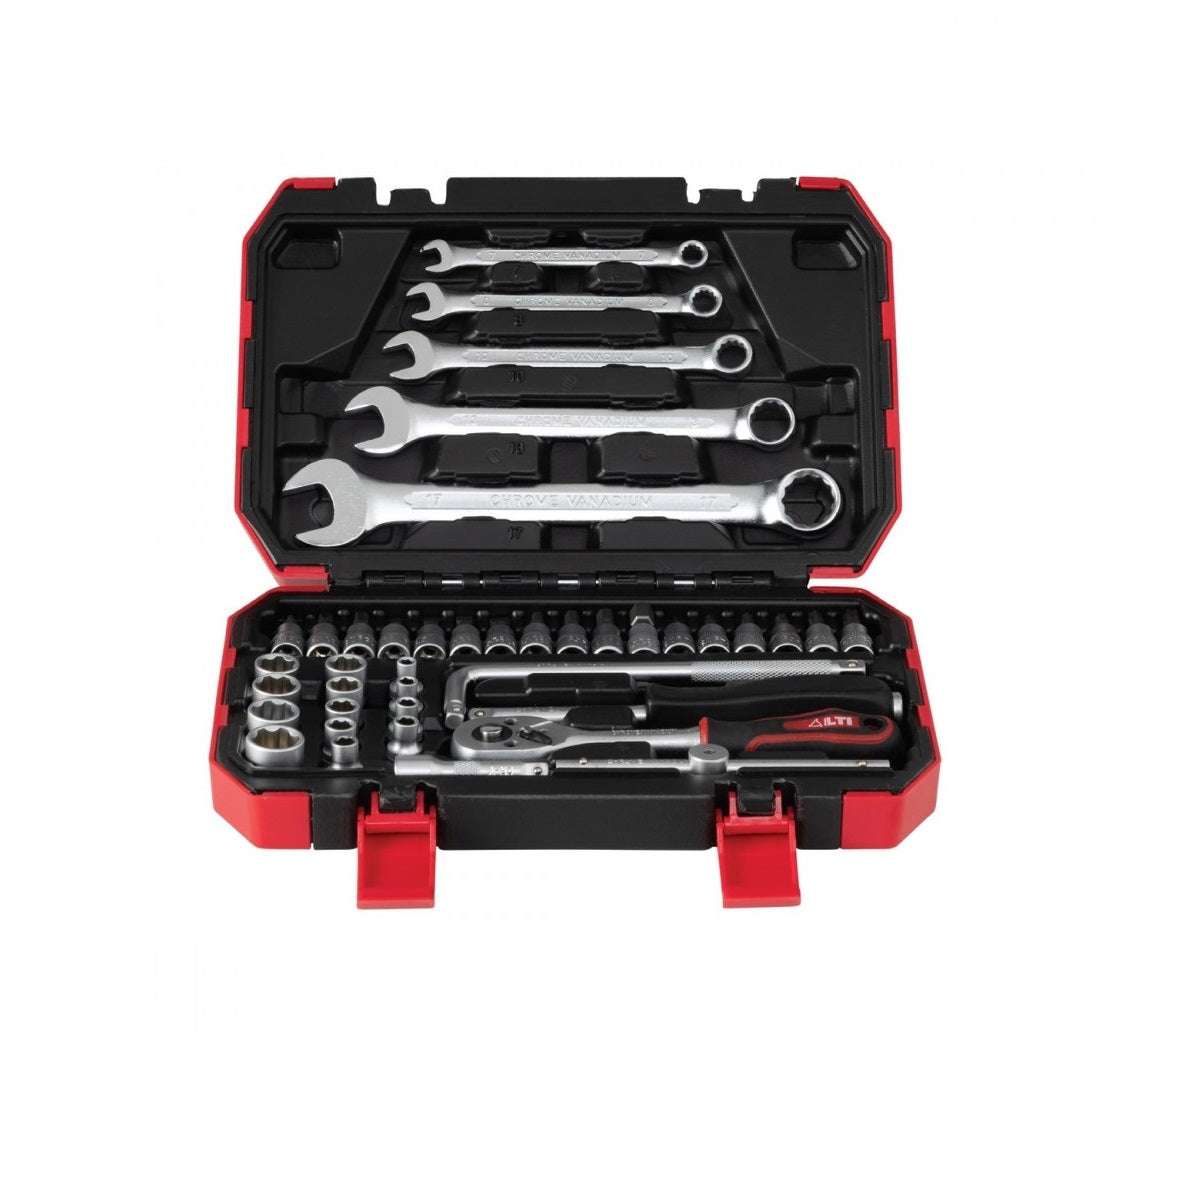 Case LTI consisting of 40 pieces with 1/4" ratchet wrench - LTI